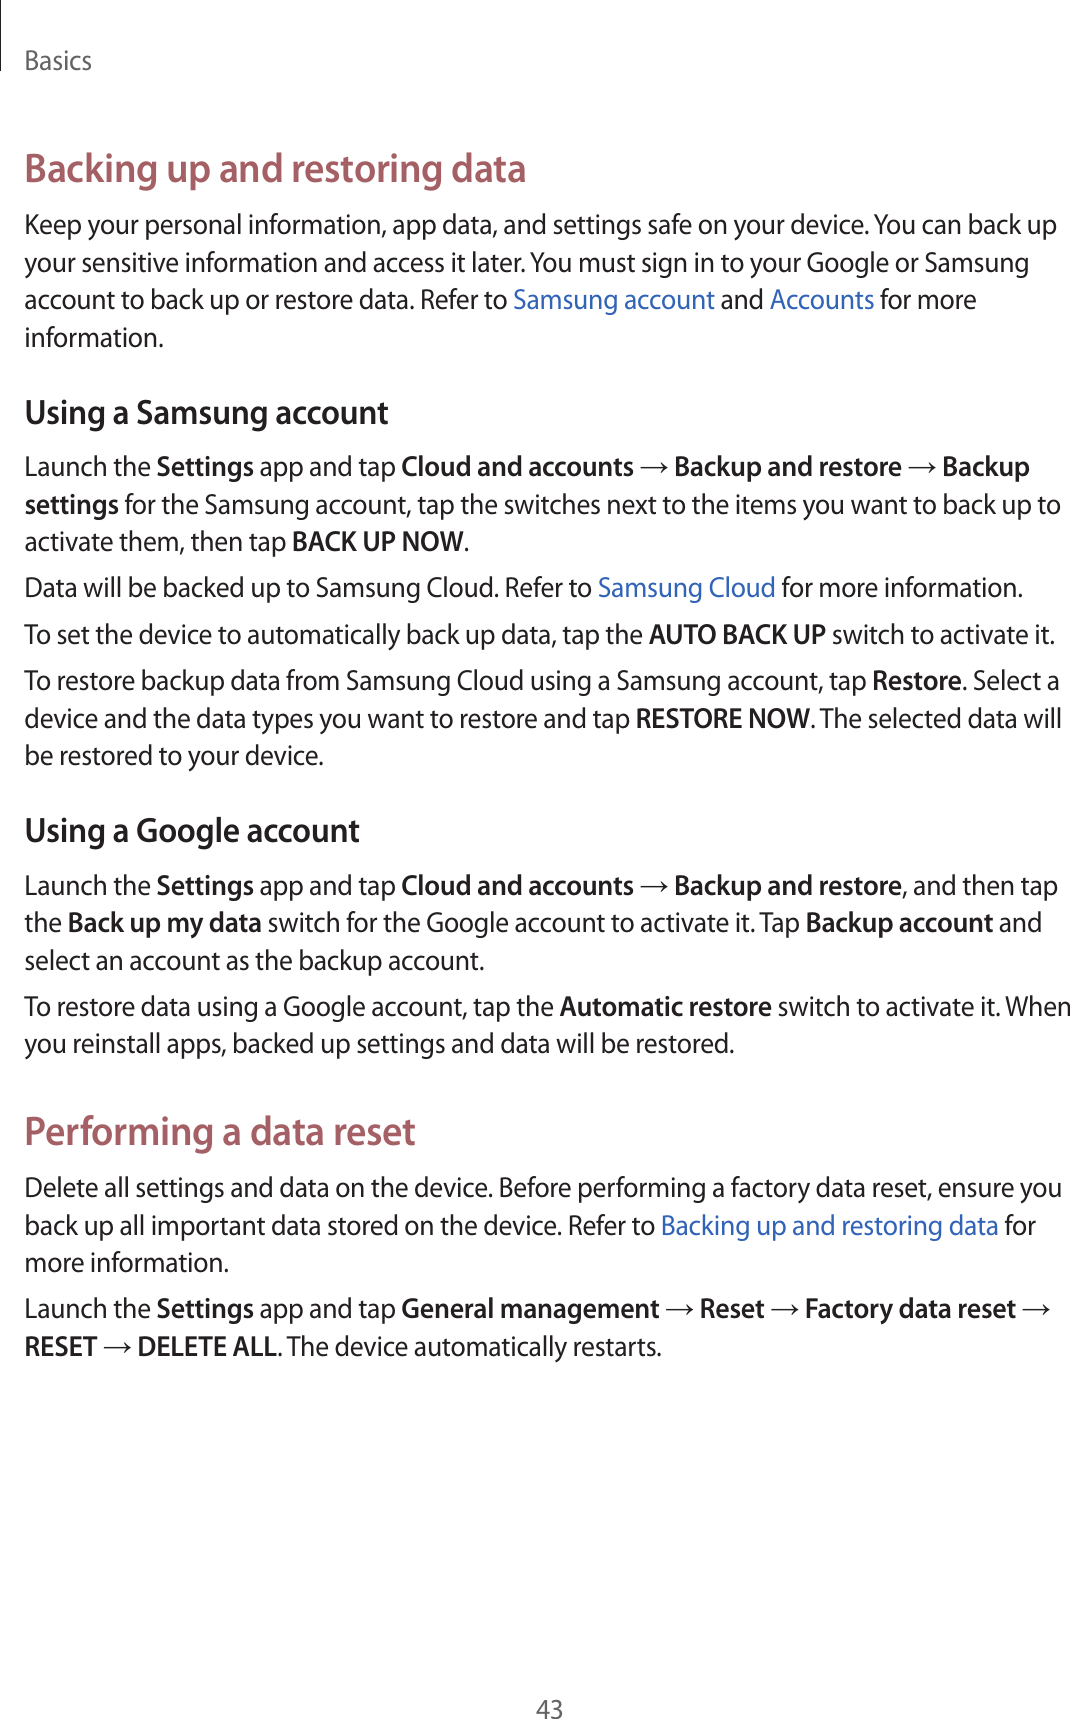 Basics43Backing up and restoring dataKeep your personal information, app data, and settings safe on your device. You can back up your sensitive information and access it later. You must sign in to your Google or Samsung account to back up or restore data. Refer to Samsung account and Accounts for more information.Using a Samsung accountLaunch the Settings app and tap Cloud and accounts → Backup and restore → Backup settings for the Samsung account, tap the switches next to the items you want to back up to activate them, then tap BACK UP NOW.Data will be backed up to Samsung Cloud. Refer to Samsung Cloud for more information.To set the device to automatically back up data, tap the AUTO BACK UP switch to activate it.To restore backup data from Samsung Cloud using a Samsung account, tap Restore. Select a device and the data types you want to restore and tap RESTORE NOW. The selected data will be restored to your device.Using a Google accountLaunch the Settings app and tap Cloud and accounts → Backup and restore, and then tap the Back up my data switch for the Google account to activate it. Tap Backup account and select an account as the backup account.To restore data using a Google account, tap the Automatic restore switch to activate it. When you reinstall apps, backed up settings and data will be restored.Performing a data resetDelete all settings and data on the device. Before performing a factory data reset, ensure you back up all important data stored on the device. Refer to Backing up and restoring data for more information.Launch the Settings app and tap General management → Reset → Factory data reset → RESET → DELETE ALL. The device automatically restarts.